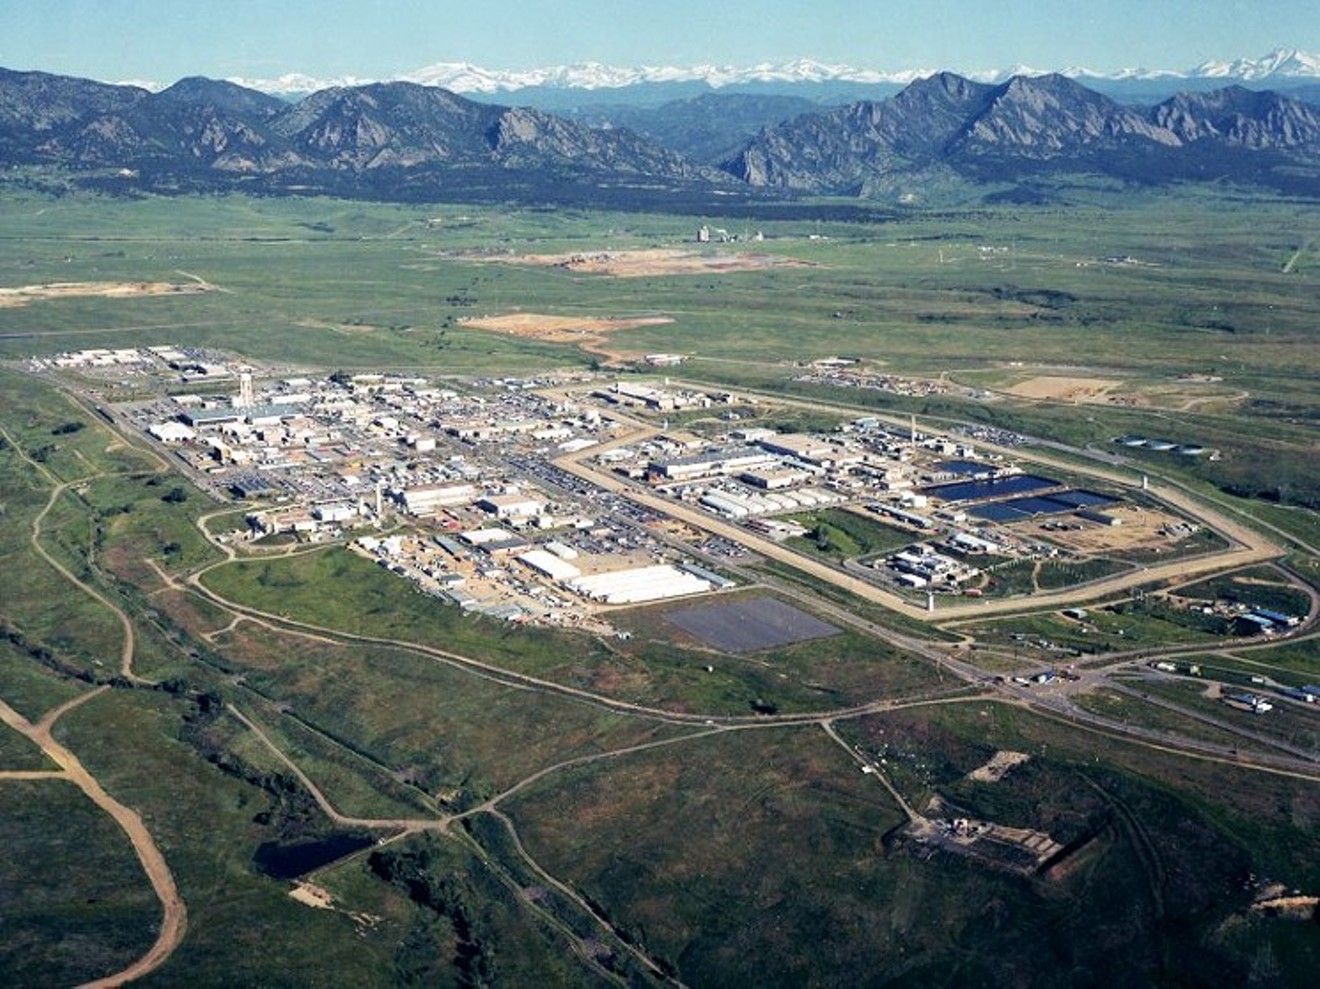 The Rocky Flats Nuclear Weapons Plant at the time of the raid.